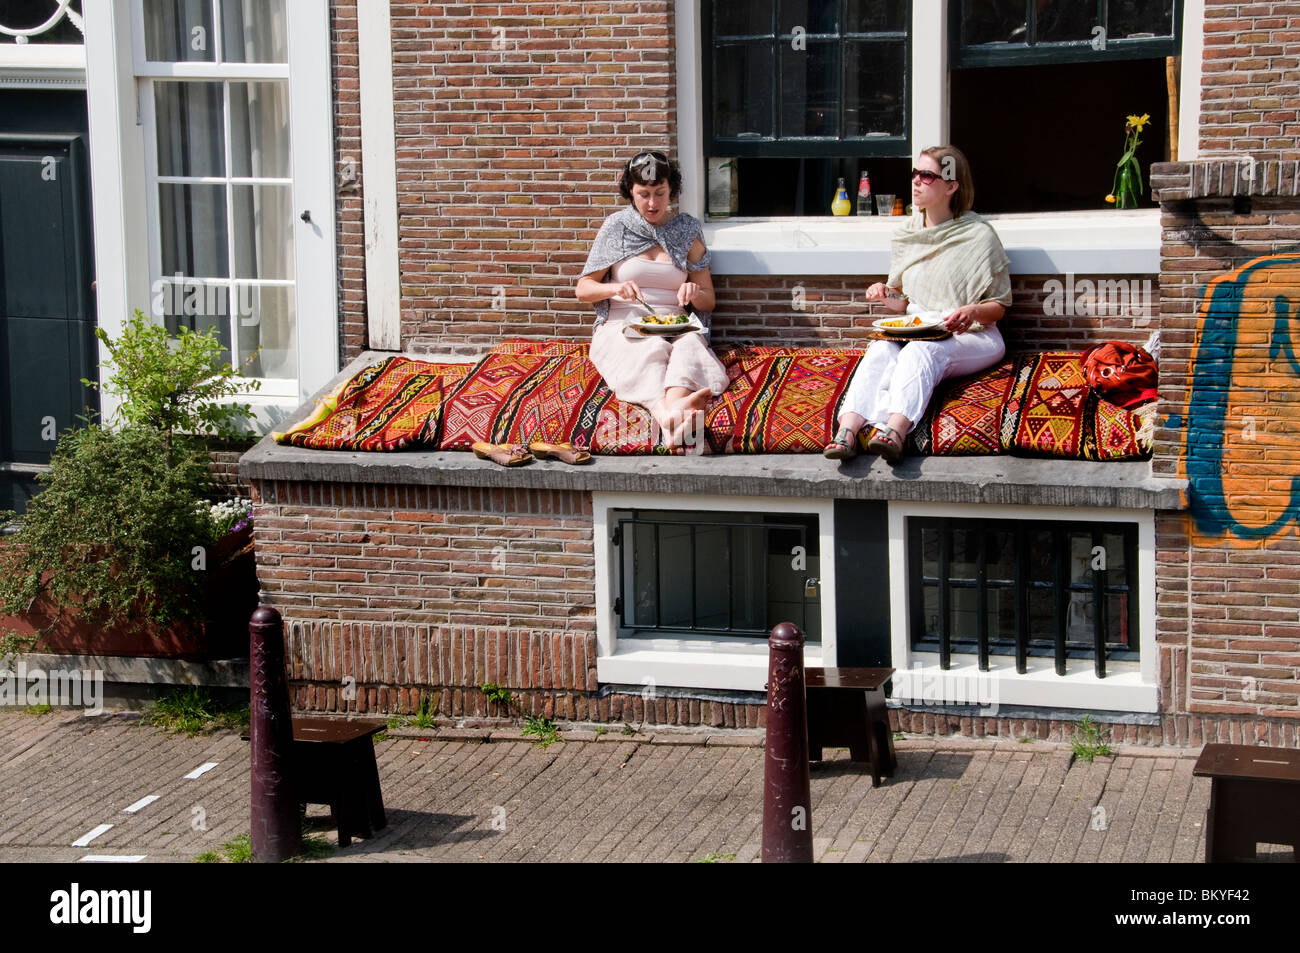 Jordaan Amsterdam The Netherlands Lunch in the sun two women Stock Photo